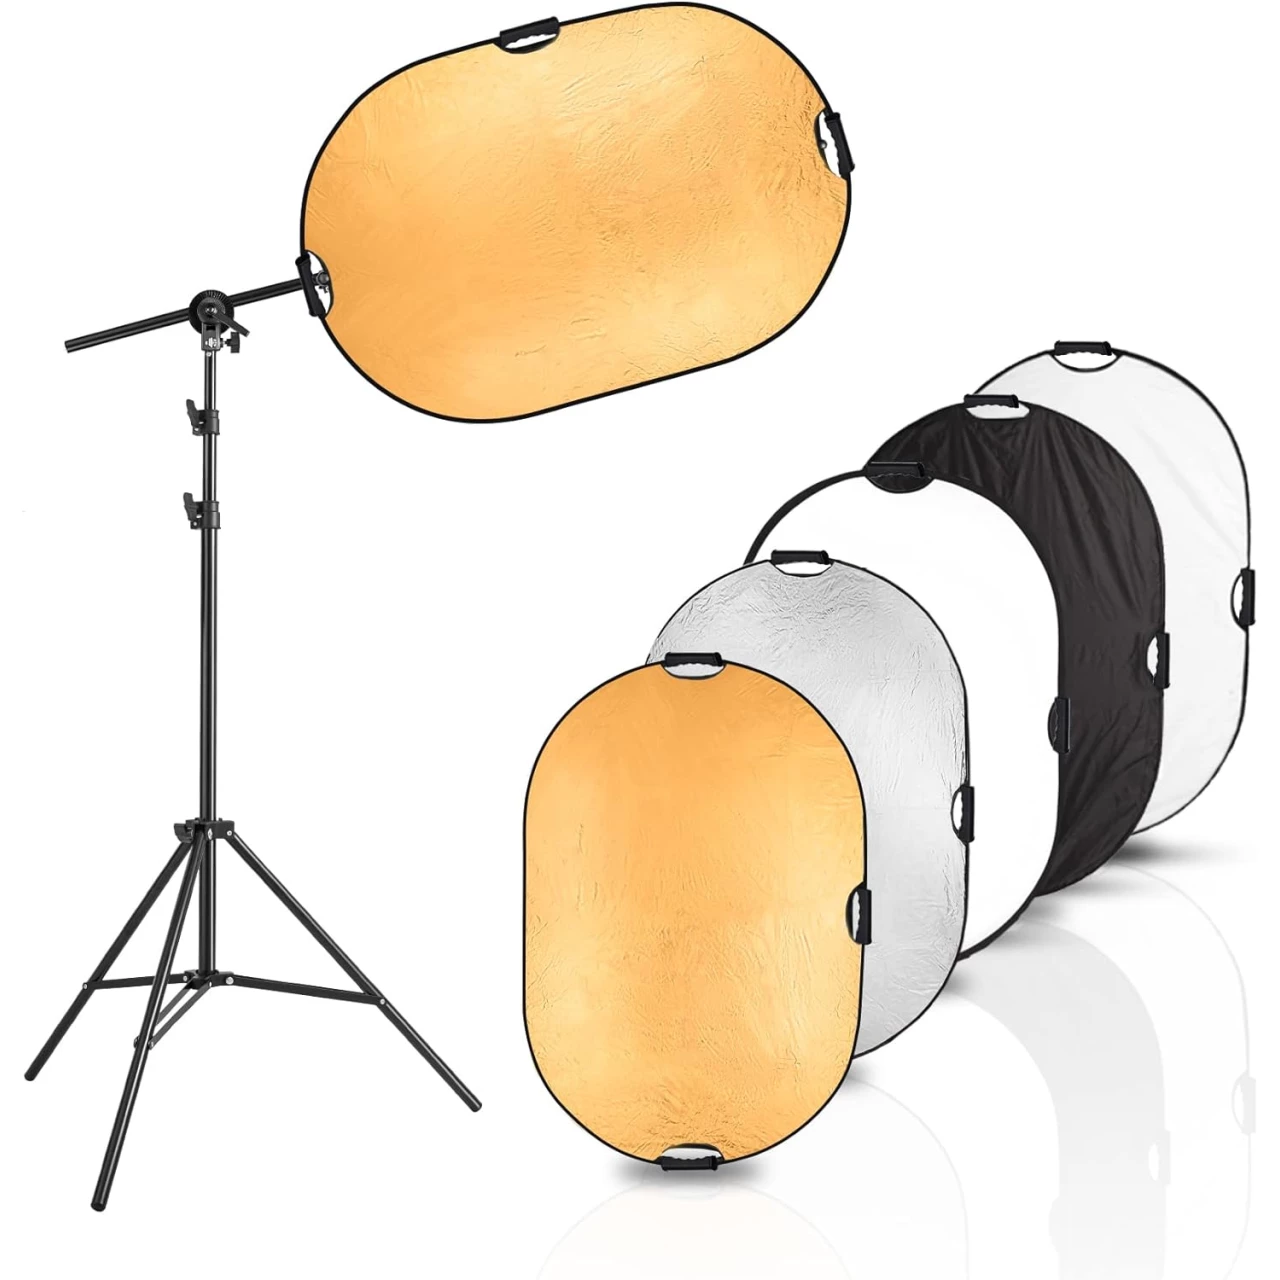 Selens Photography Reflector Stand kit, 24x36 inches 5 in 1 reflectors with 78 inches Light Stands and Extendable Holder Arm Clips